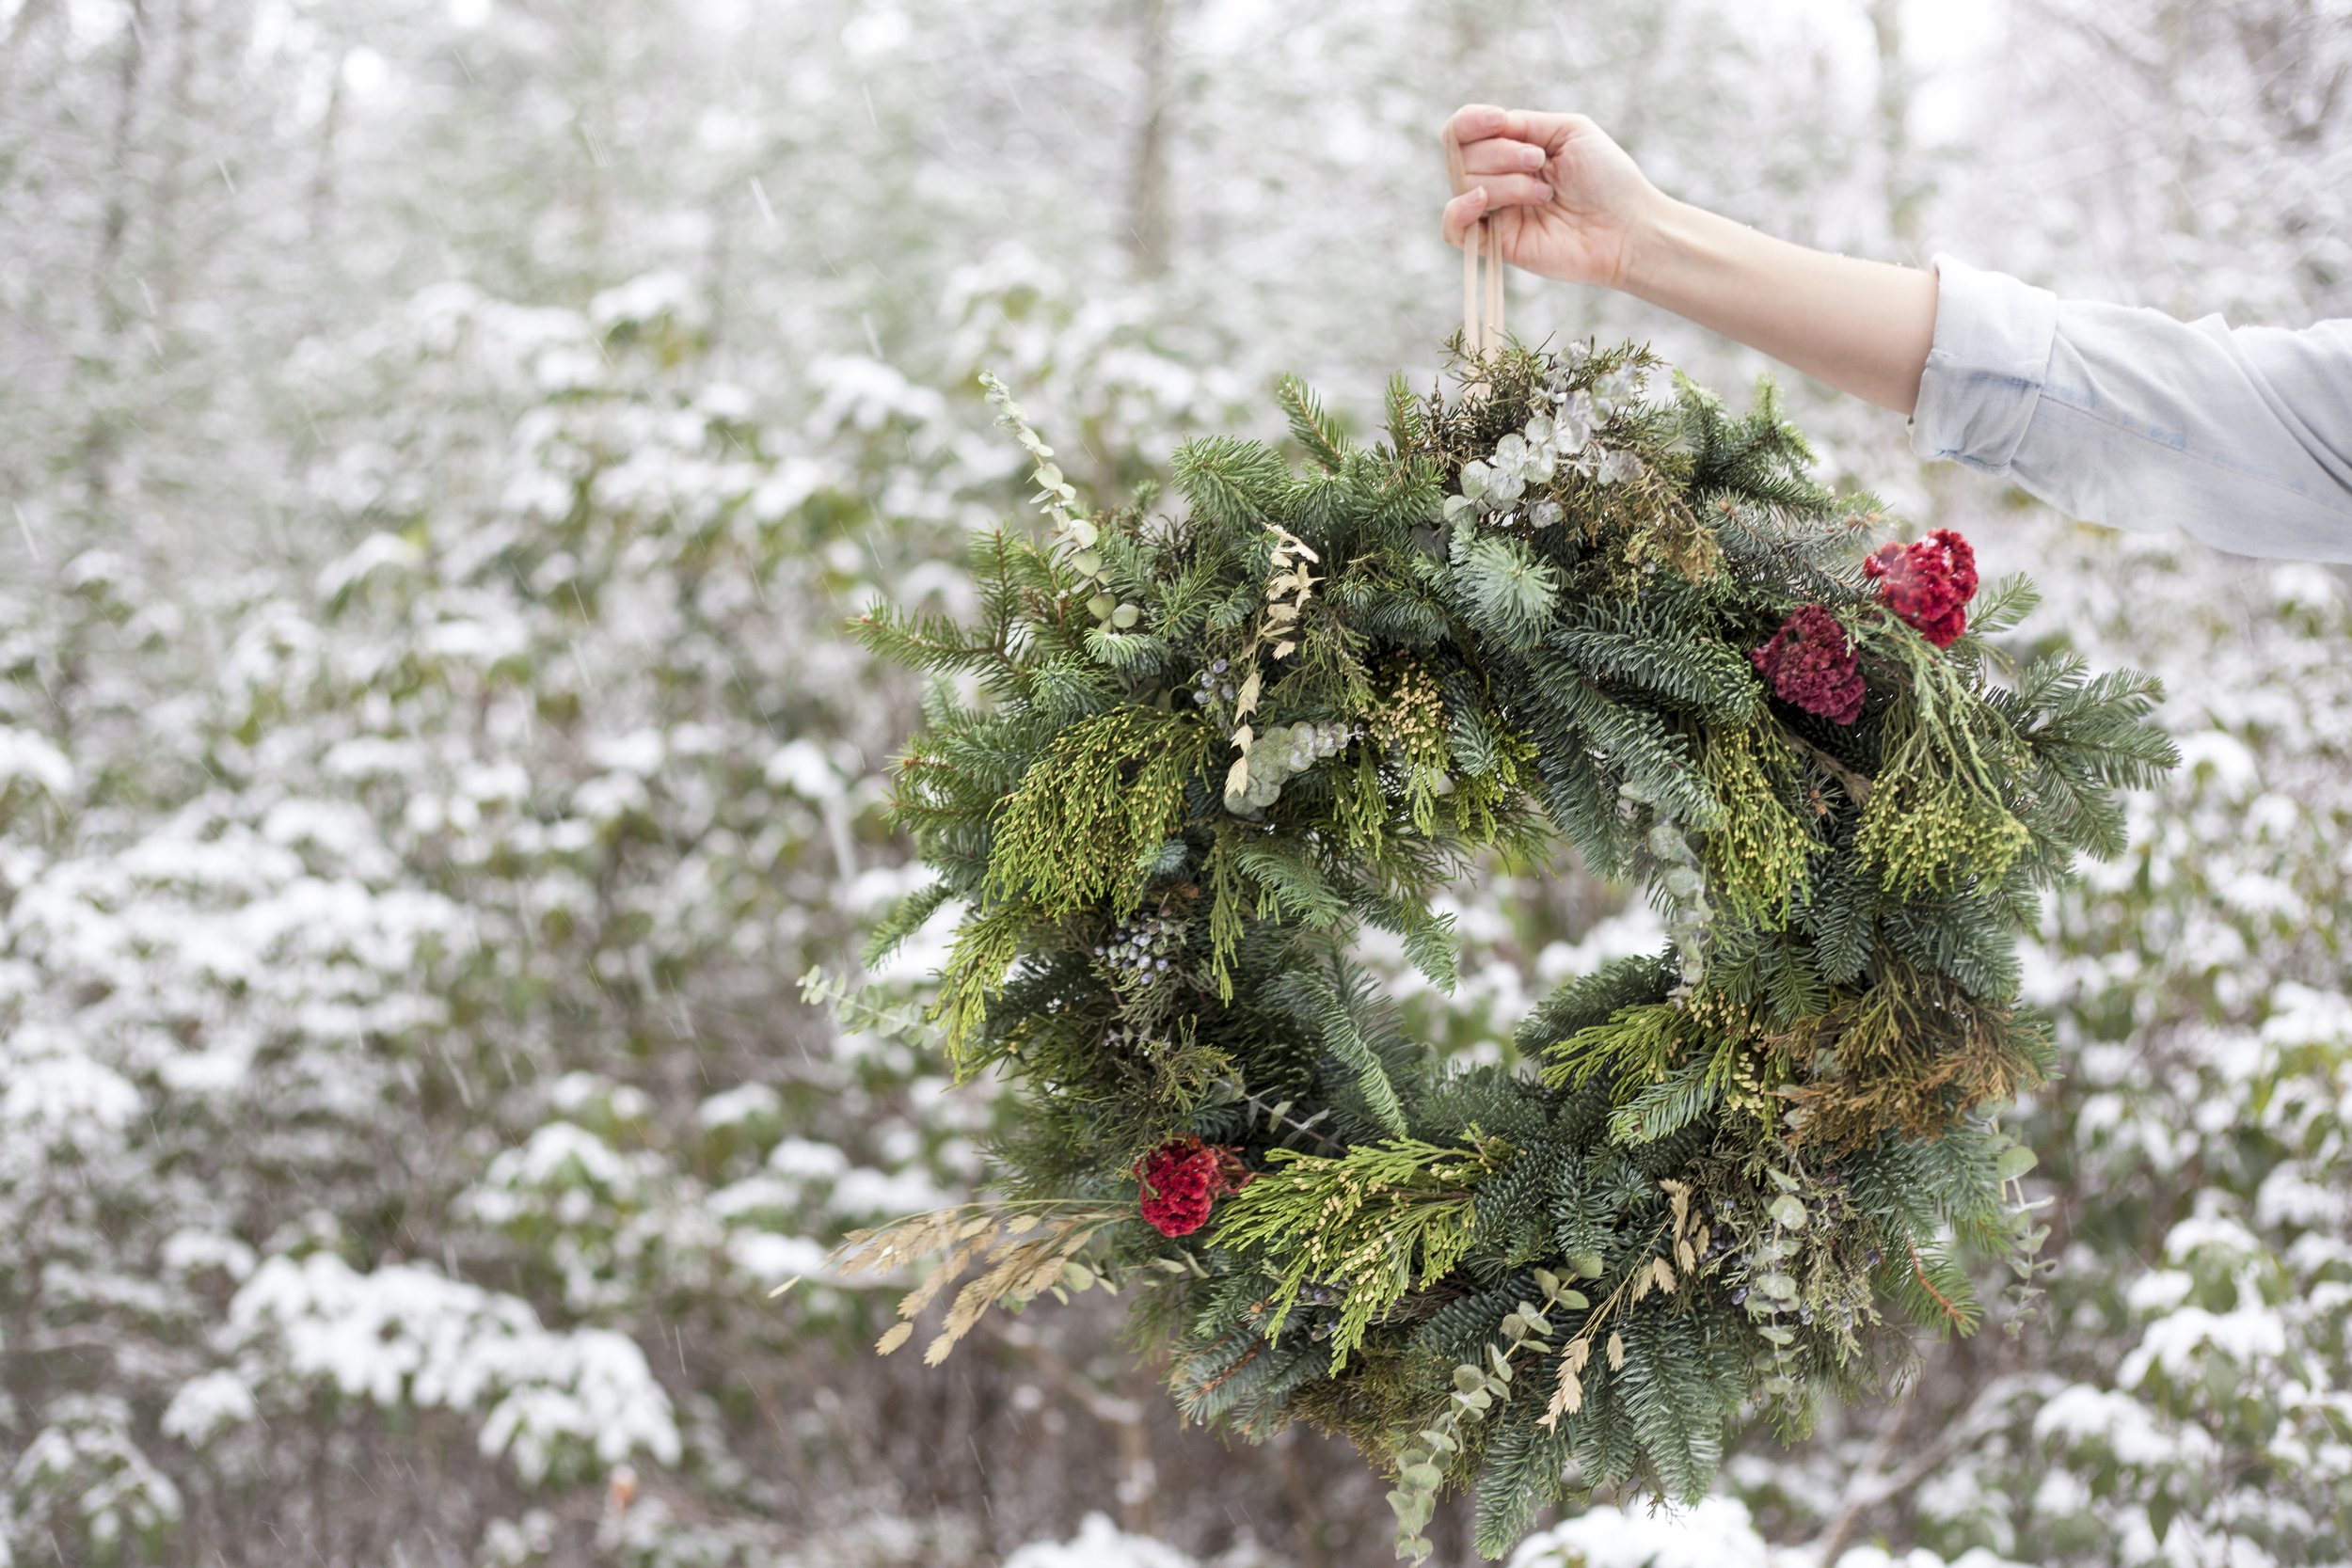 Albany Circles of Caring effort brings in more than 100 handmade wreaths